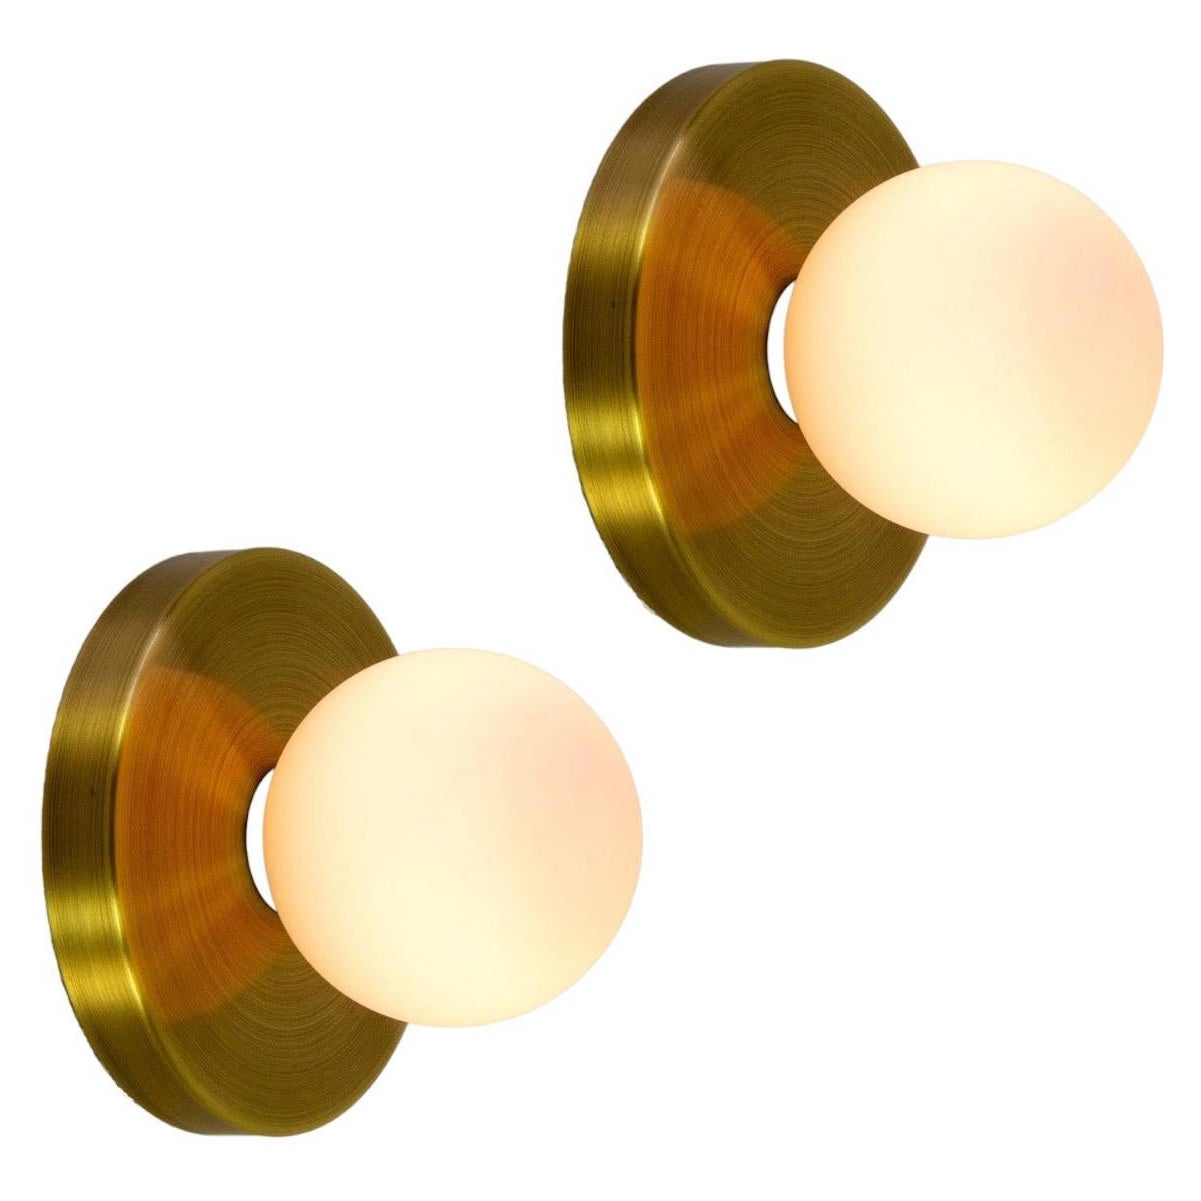 Pair of Globe Sconces by Research.Lighting, Brushed Brass, In Stock